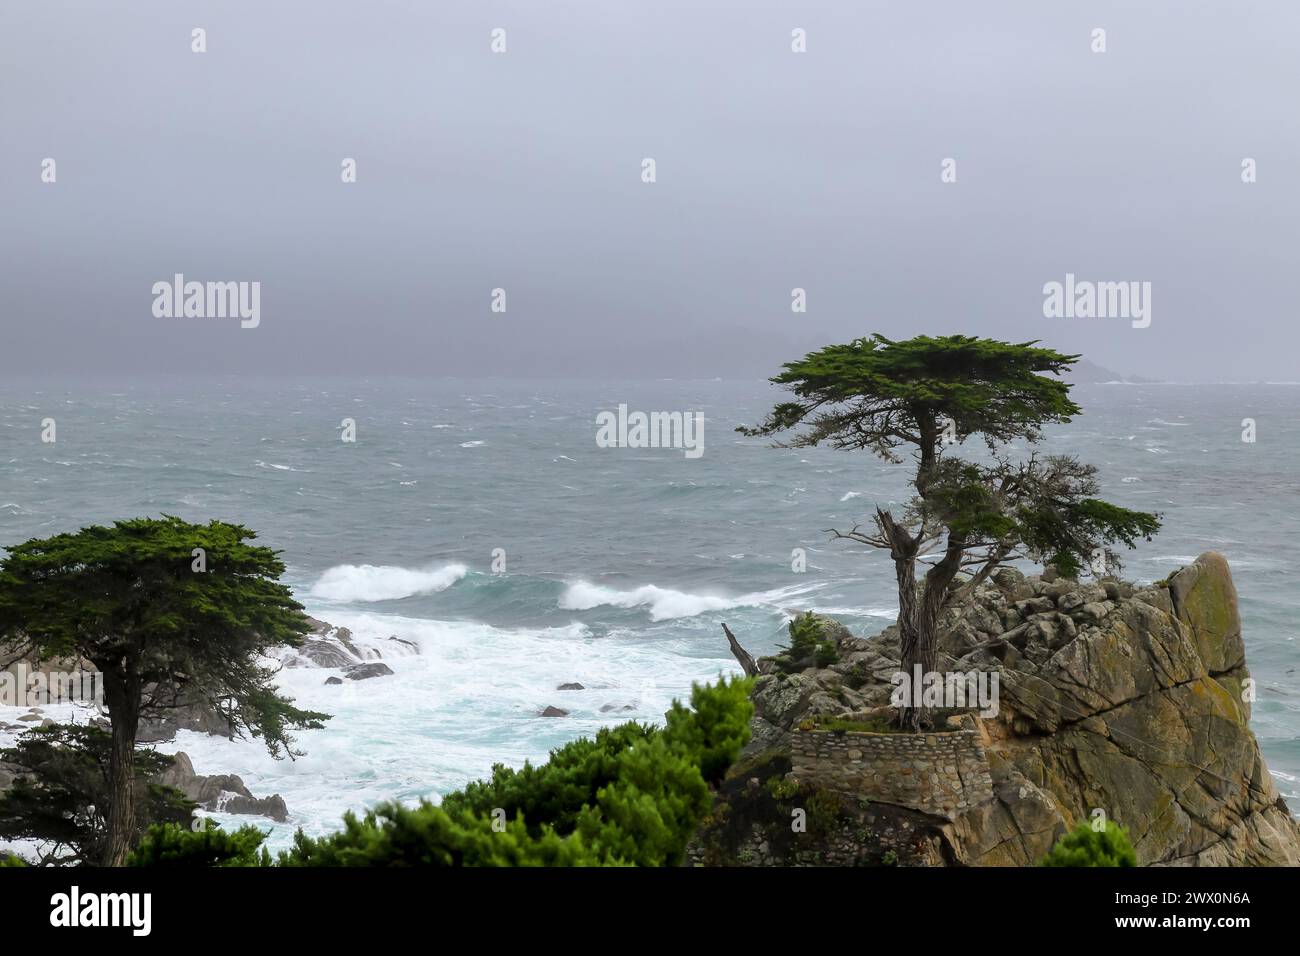 The Lone Cypress at 17-mile drive Pebble beach, California on a rainy day. Stock Photo